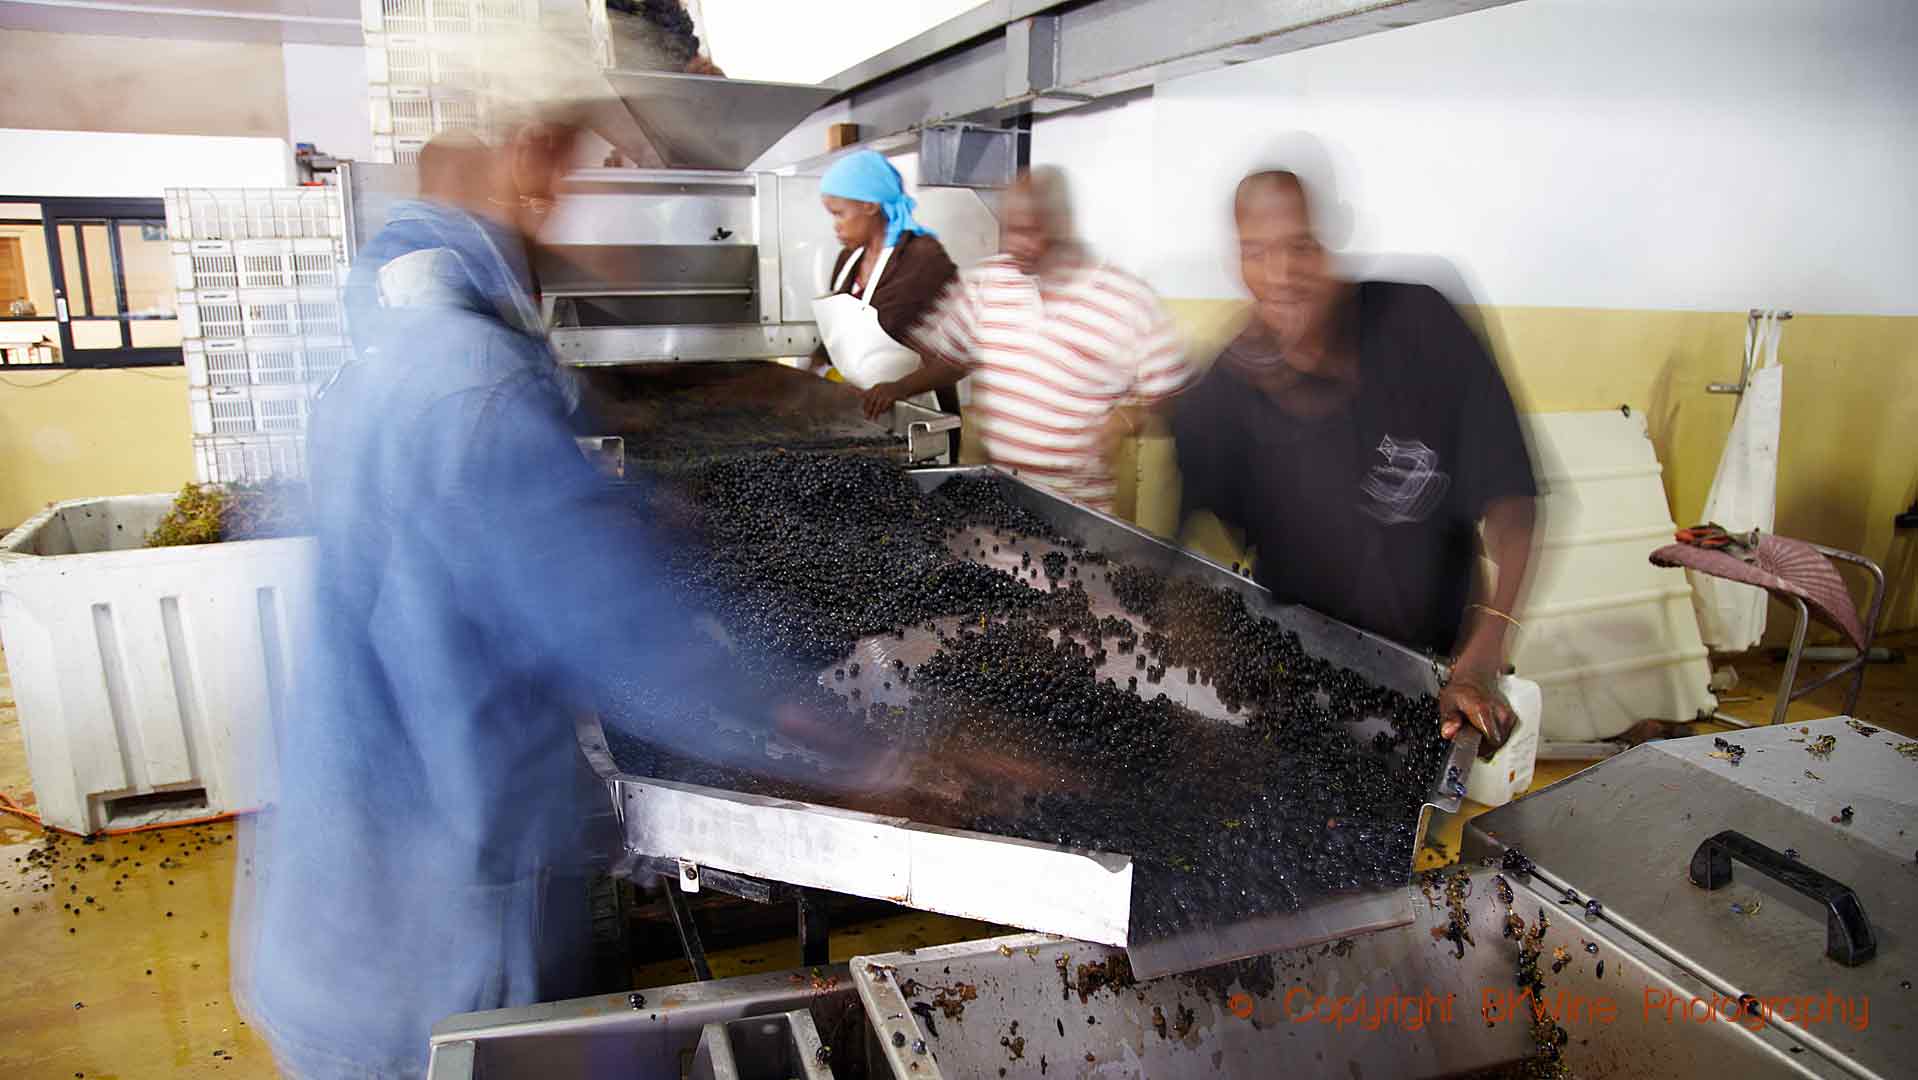 Sorting grapes in from harvest in Stellenbosch, South Africa